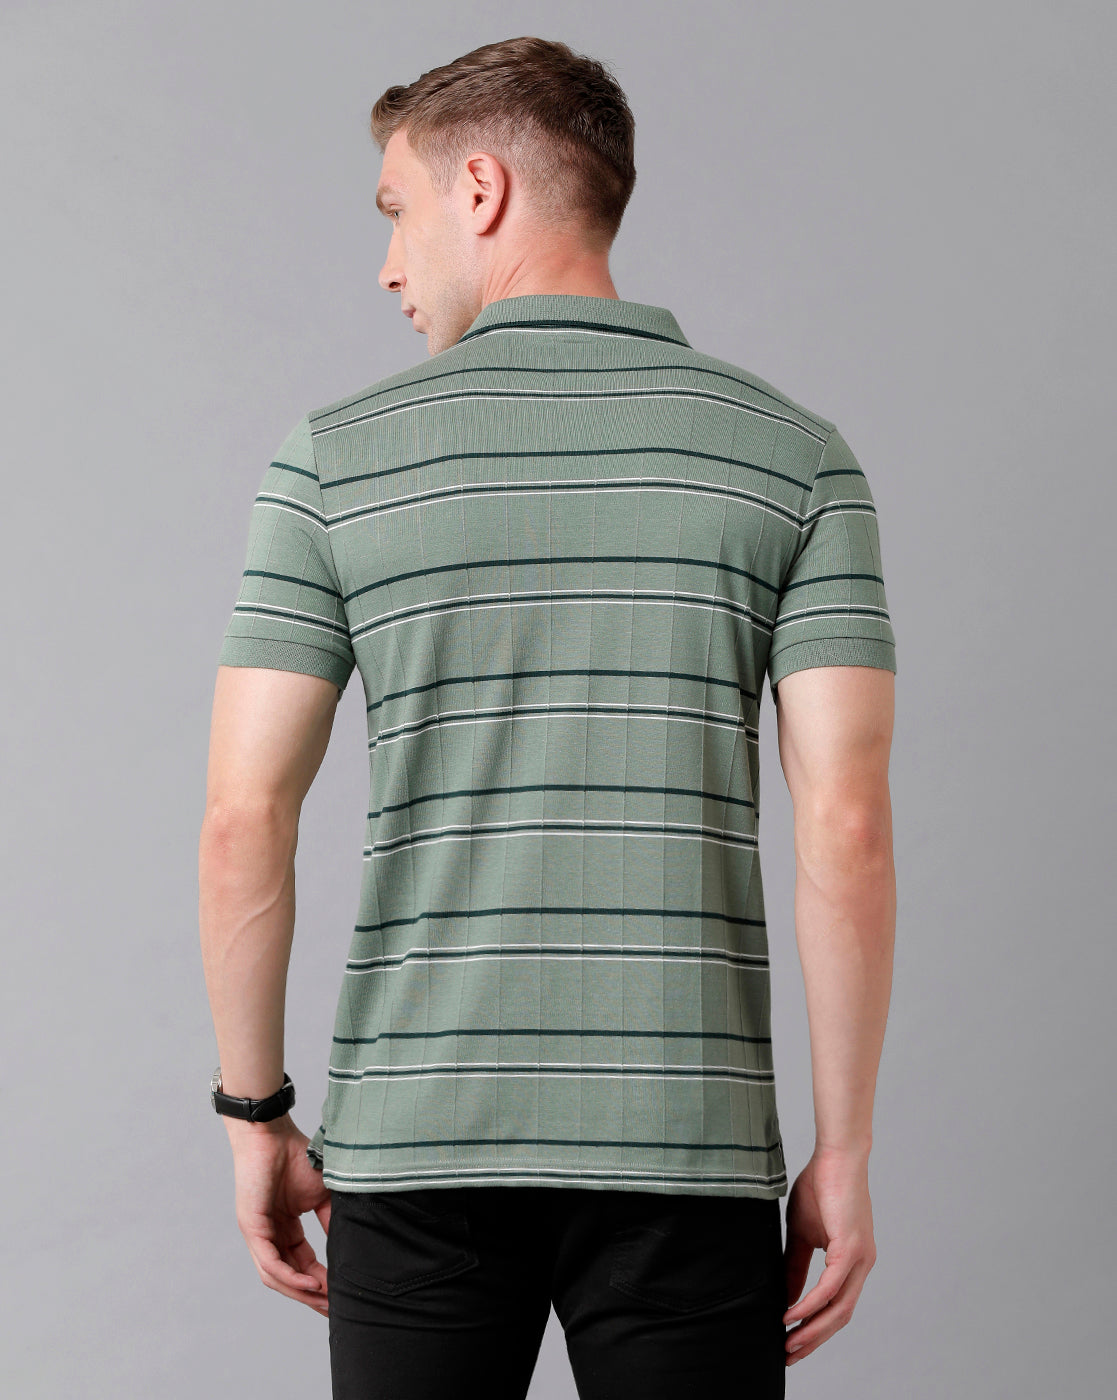 Classic Polo Men's Cotton Striped Half Sleeve Slim Fit Polo Neck Green Color T-Shirt | Trs - 92 A